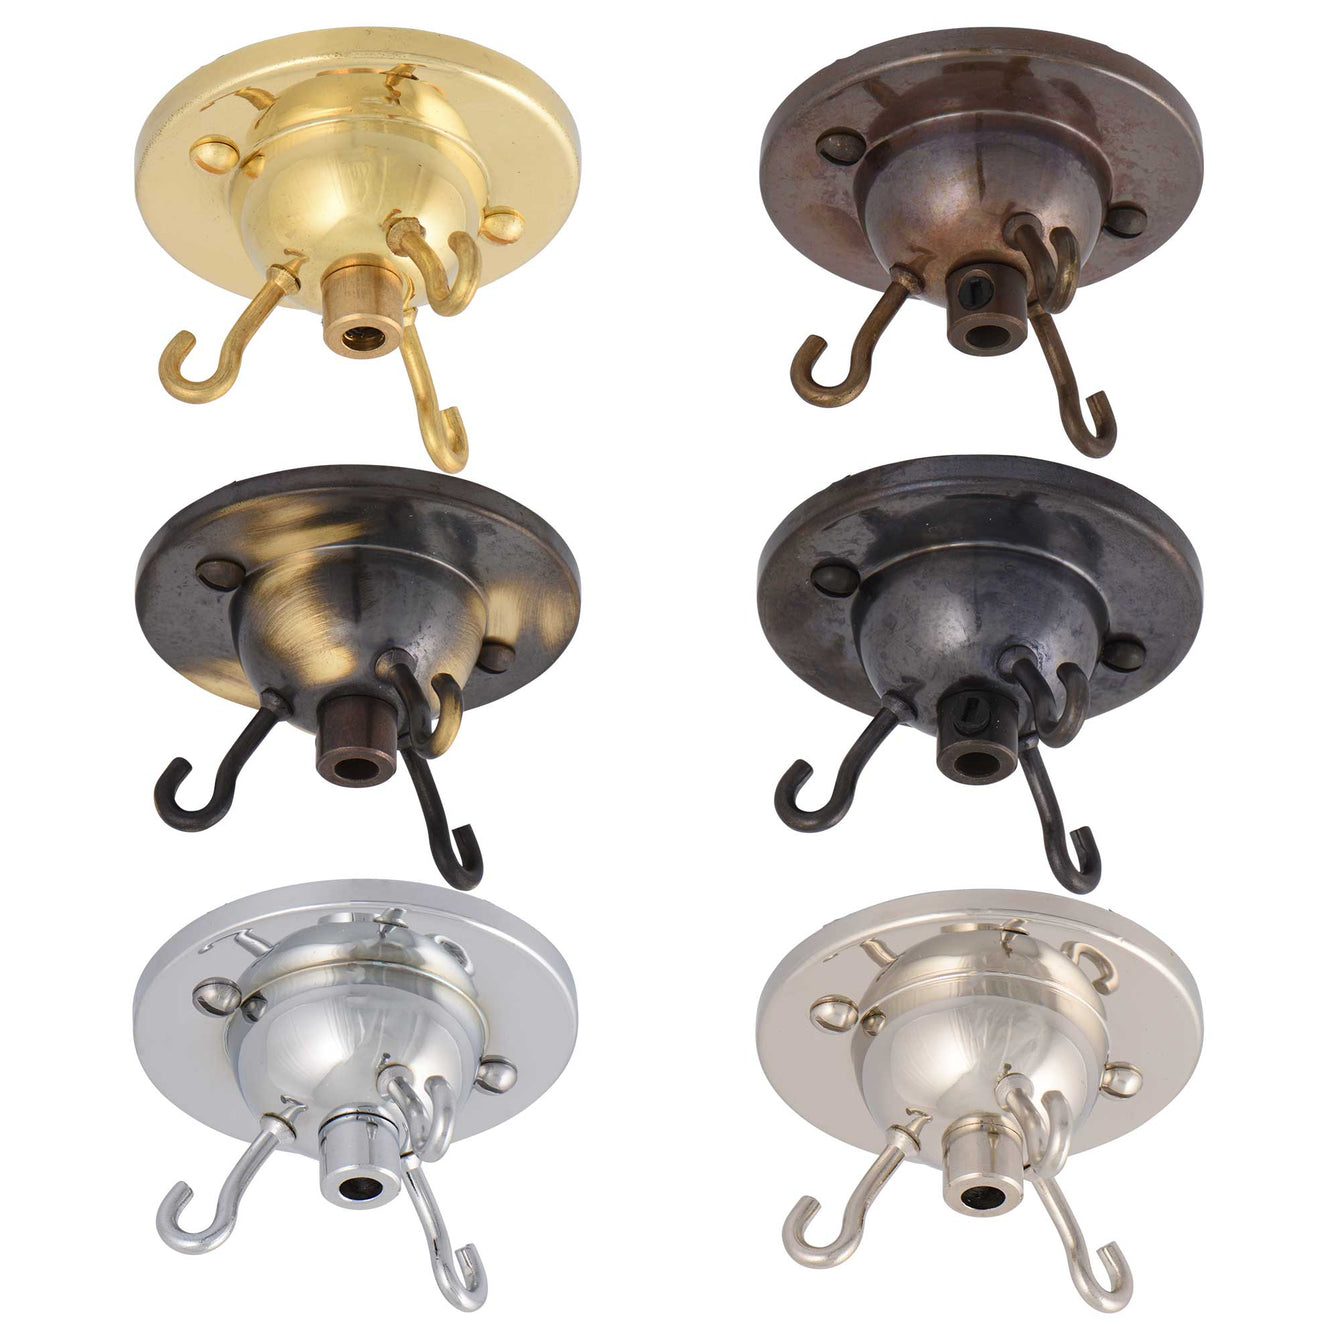 ElekTek 3 Hook Ceiling Rose With Matching Screws and Cord Grip Colours - Buy It Better Brass